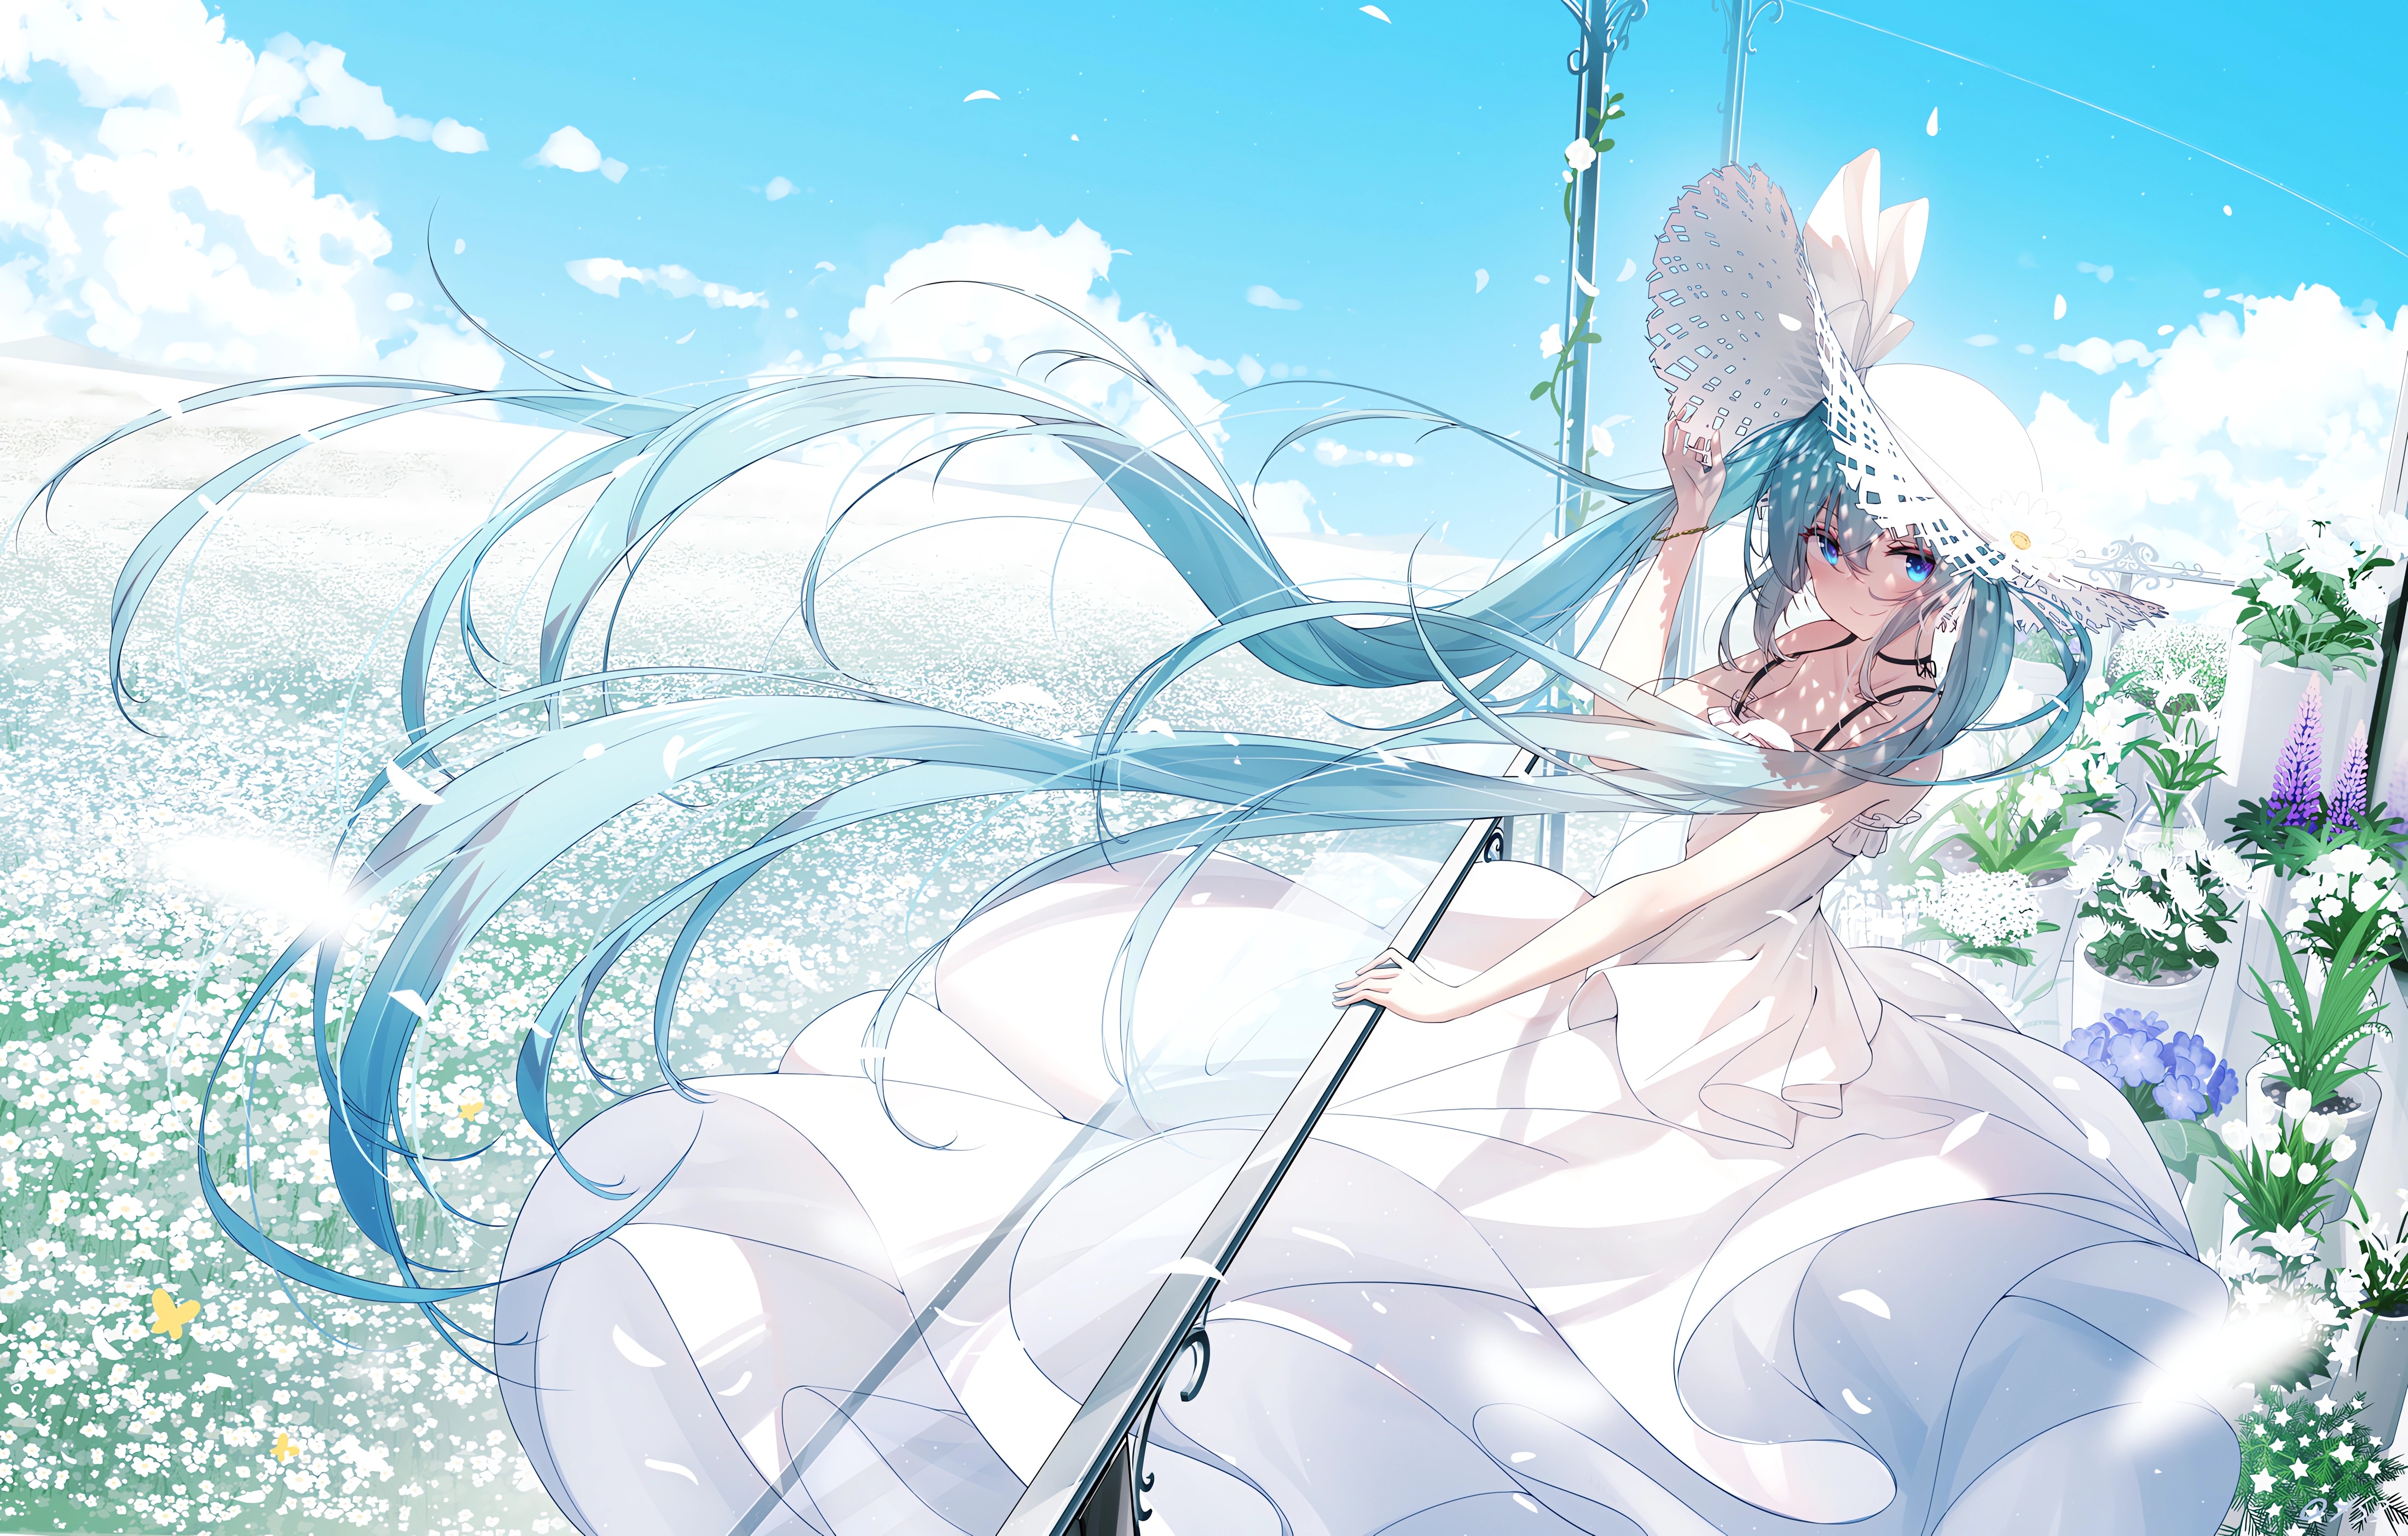 Anime Anime Girls Hatsune Miku Vocaloid Hair Blowing In The Wind Flowers White Dress 4400x2806